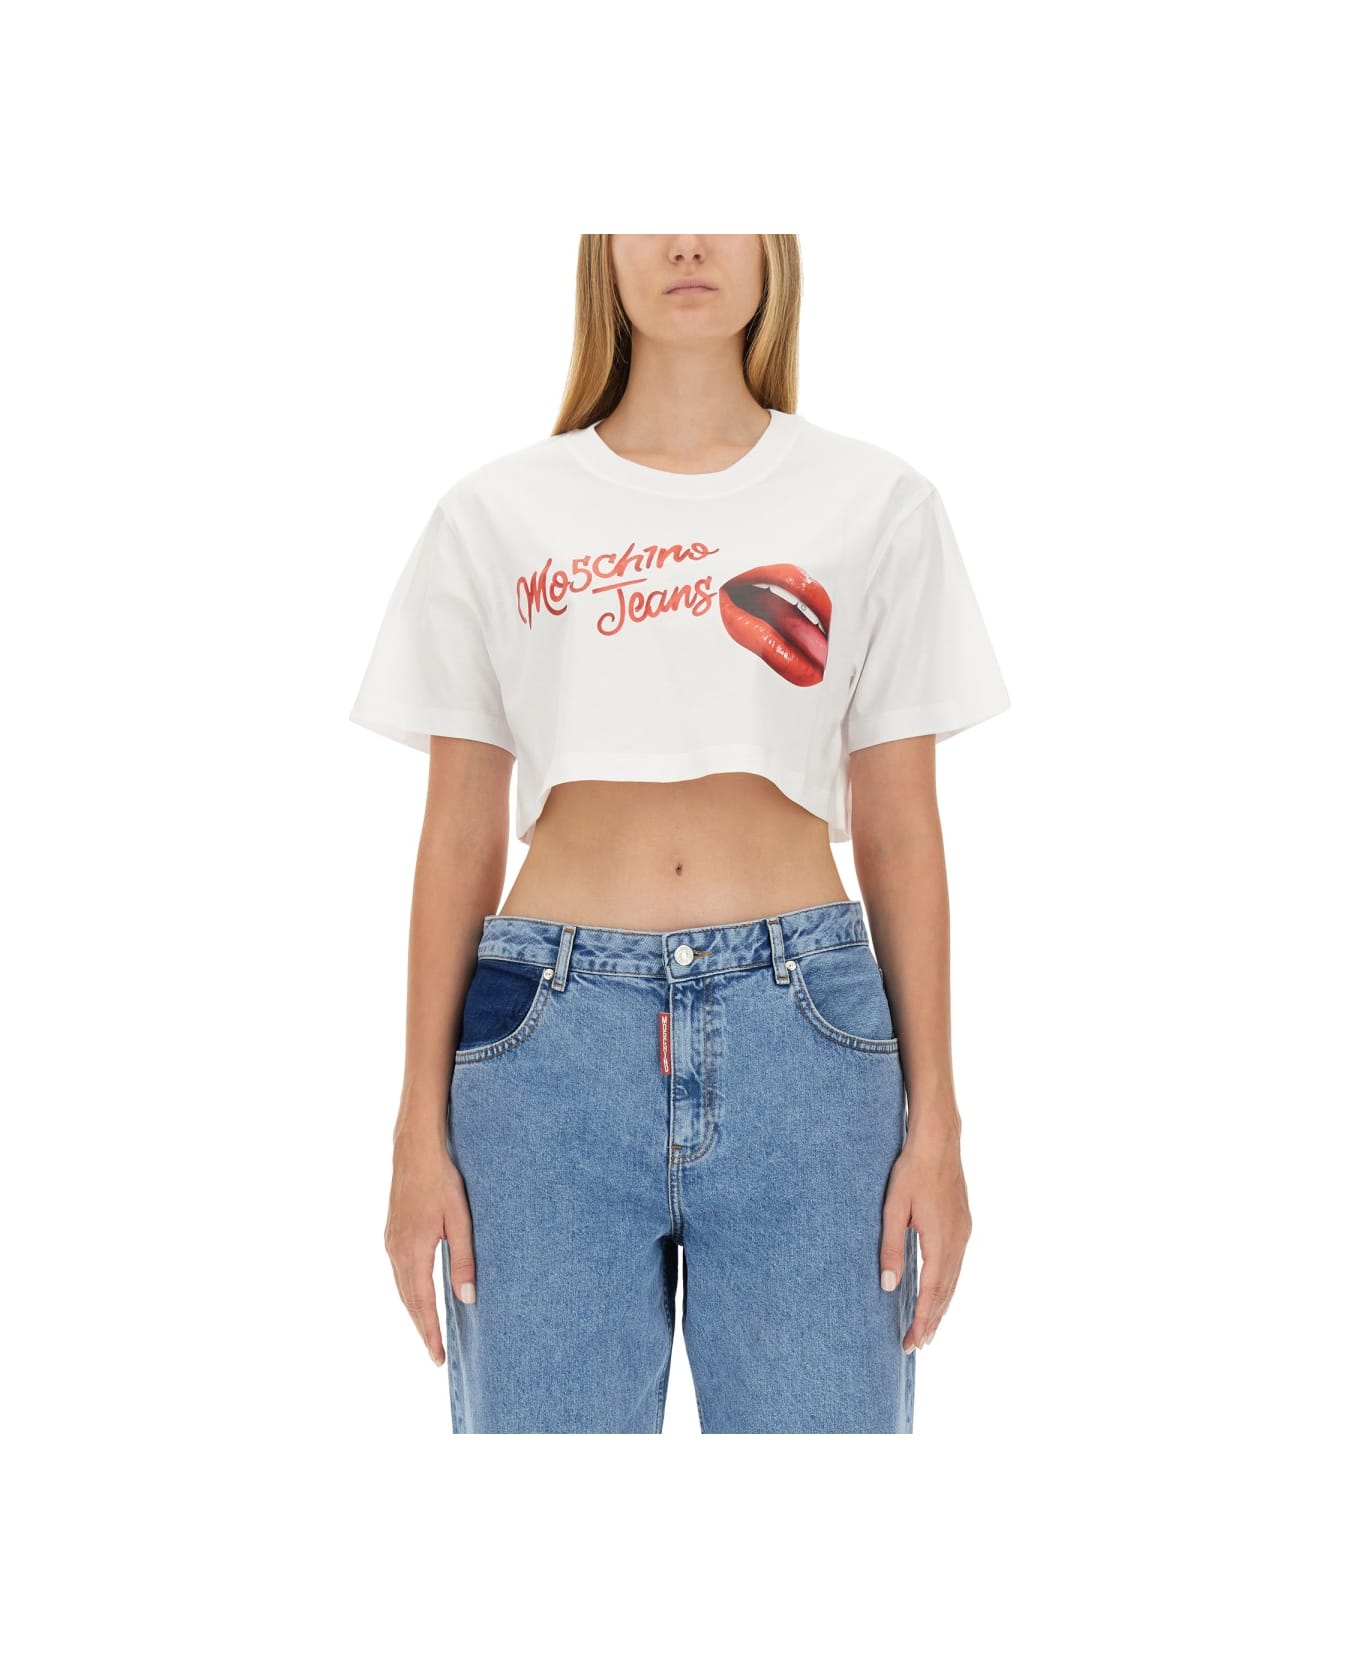 M05CH1N0 Jeans T-shirt With Logo - WHITE